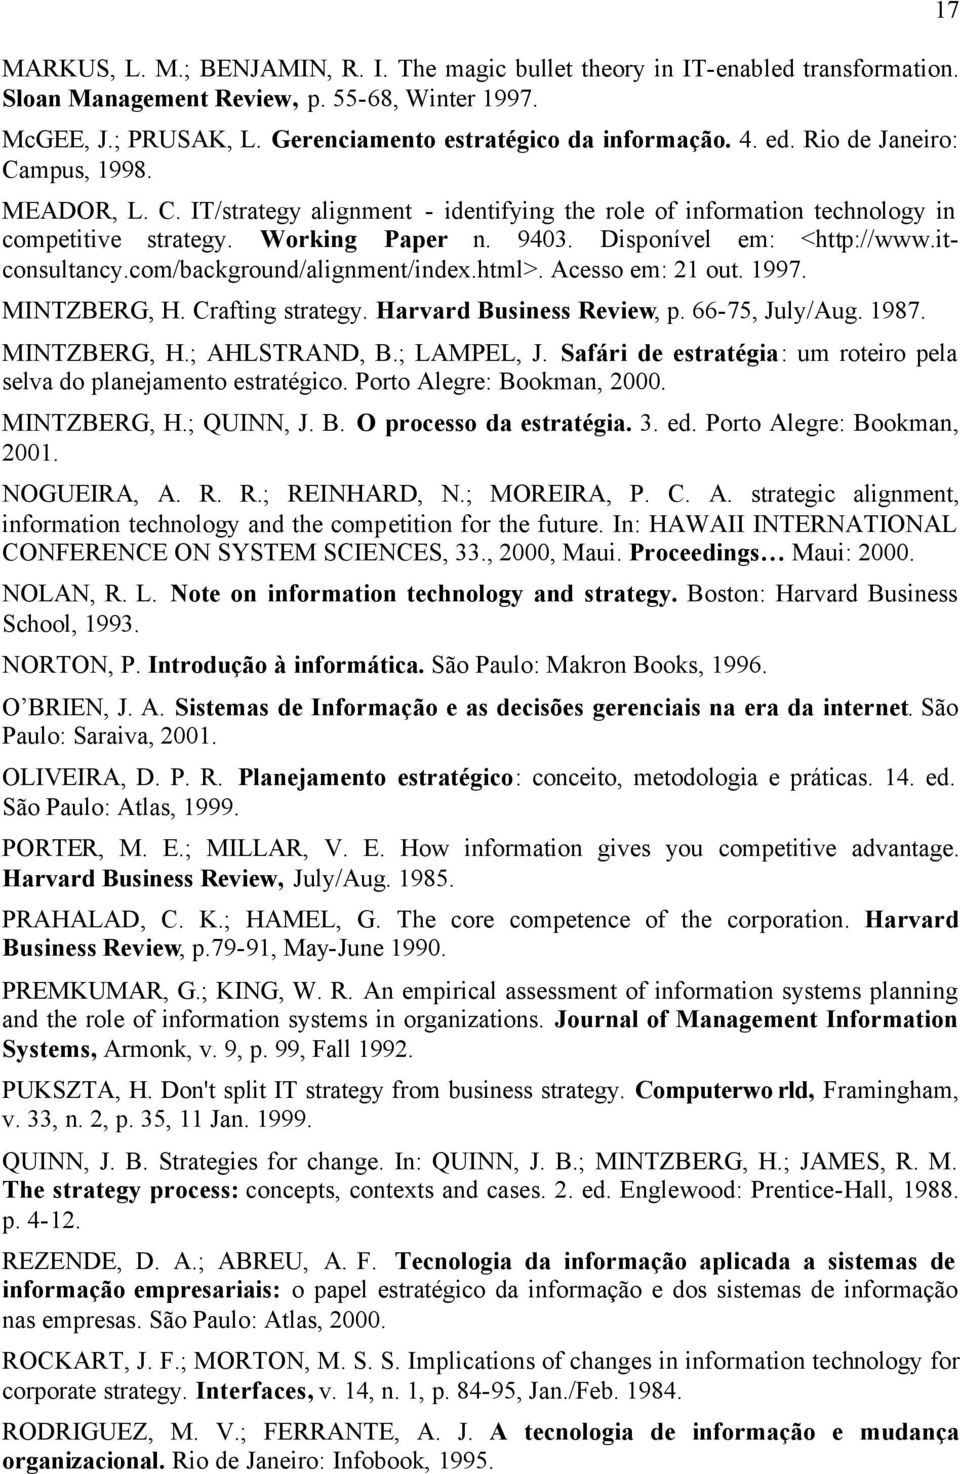 itconsultancy.com/background/alignment/index.html>. Acesso em: 21 out. 1997. MINTZBERG, H. Crafting strategy. Harvard Business Review, p. 66-75, July/Aug. 1987. MINTZBERG, H.; AHLSTRAND, B.